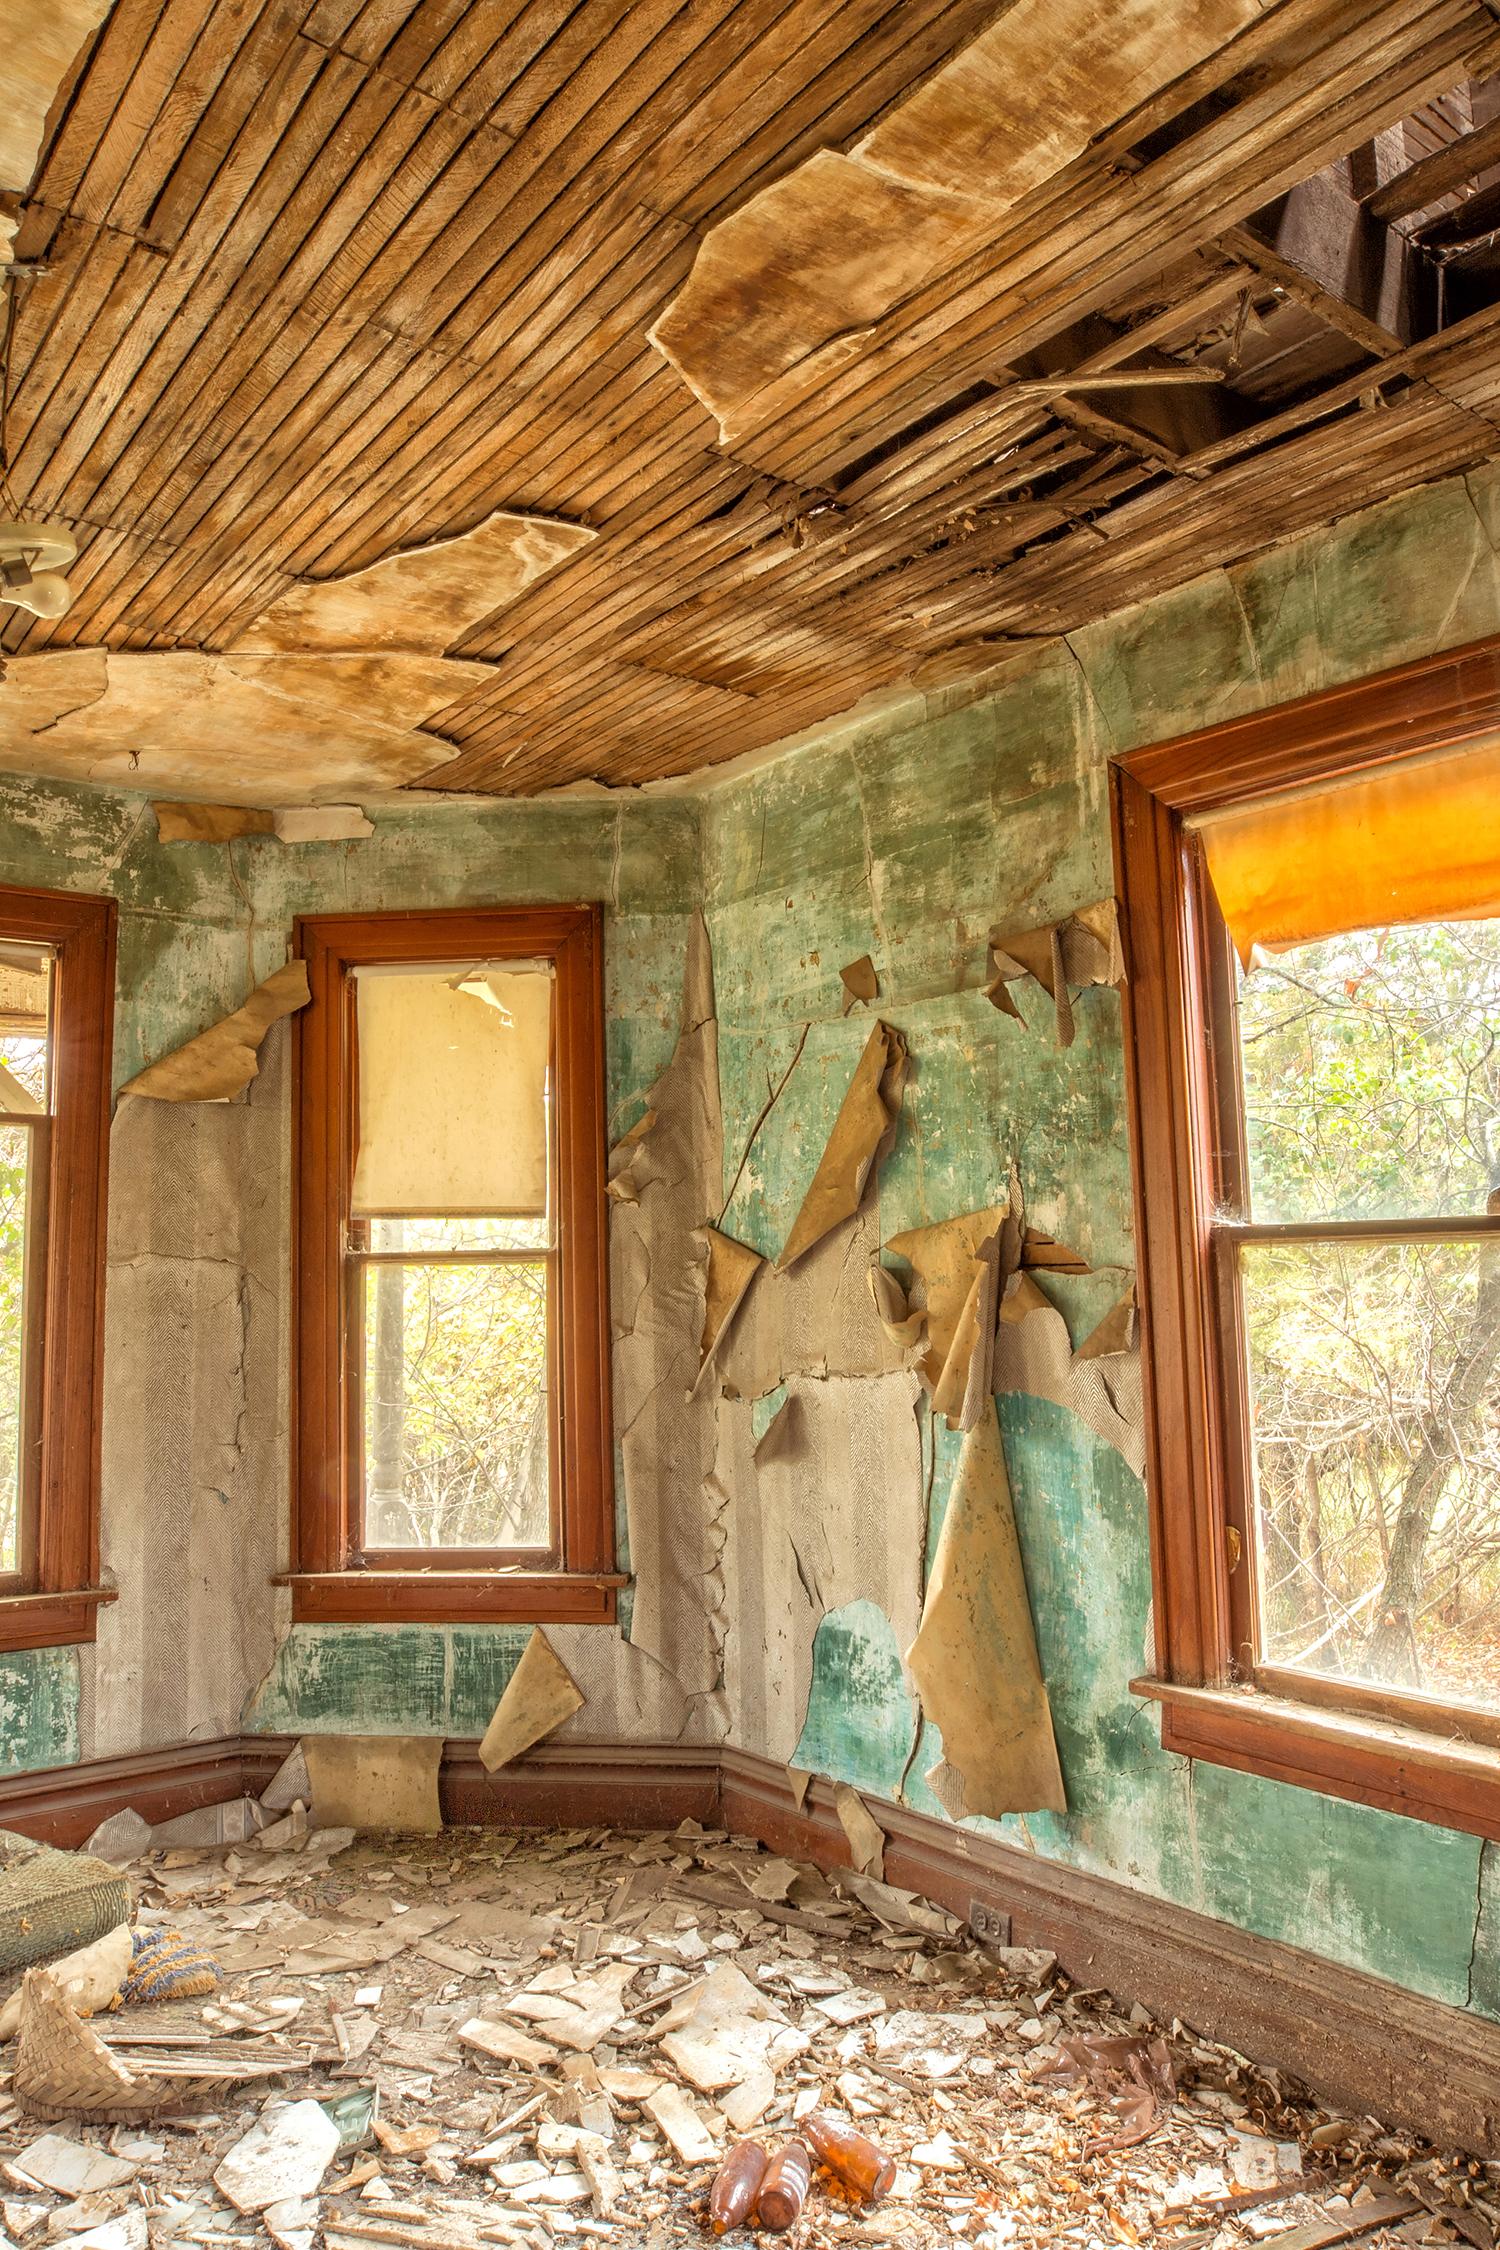 Rebecca Skinner’s “Interior II” is a 12 x 18 inch color photograph taken from inside an abandoned farmhouse in North Dakota. Three windows offer a peak at the surrounding overgrowth in a dilapidated living room with colors of blue, green and brown.